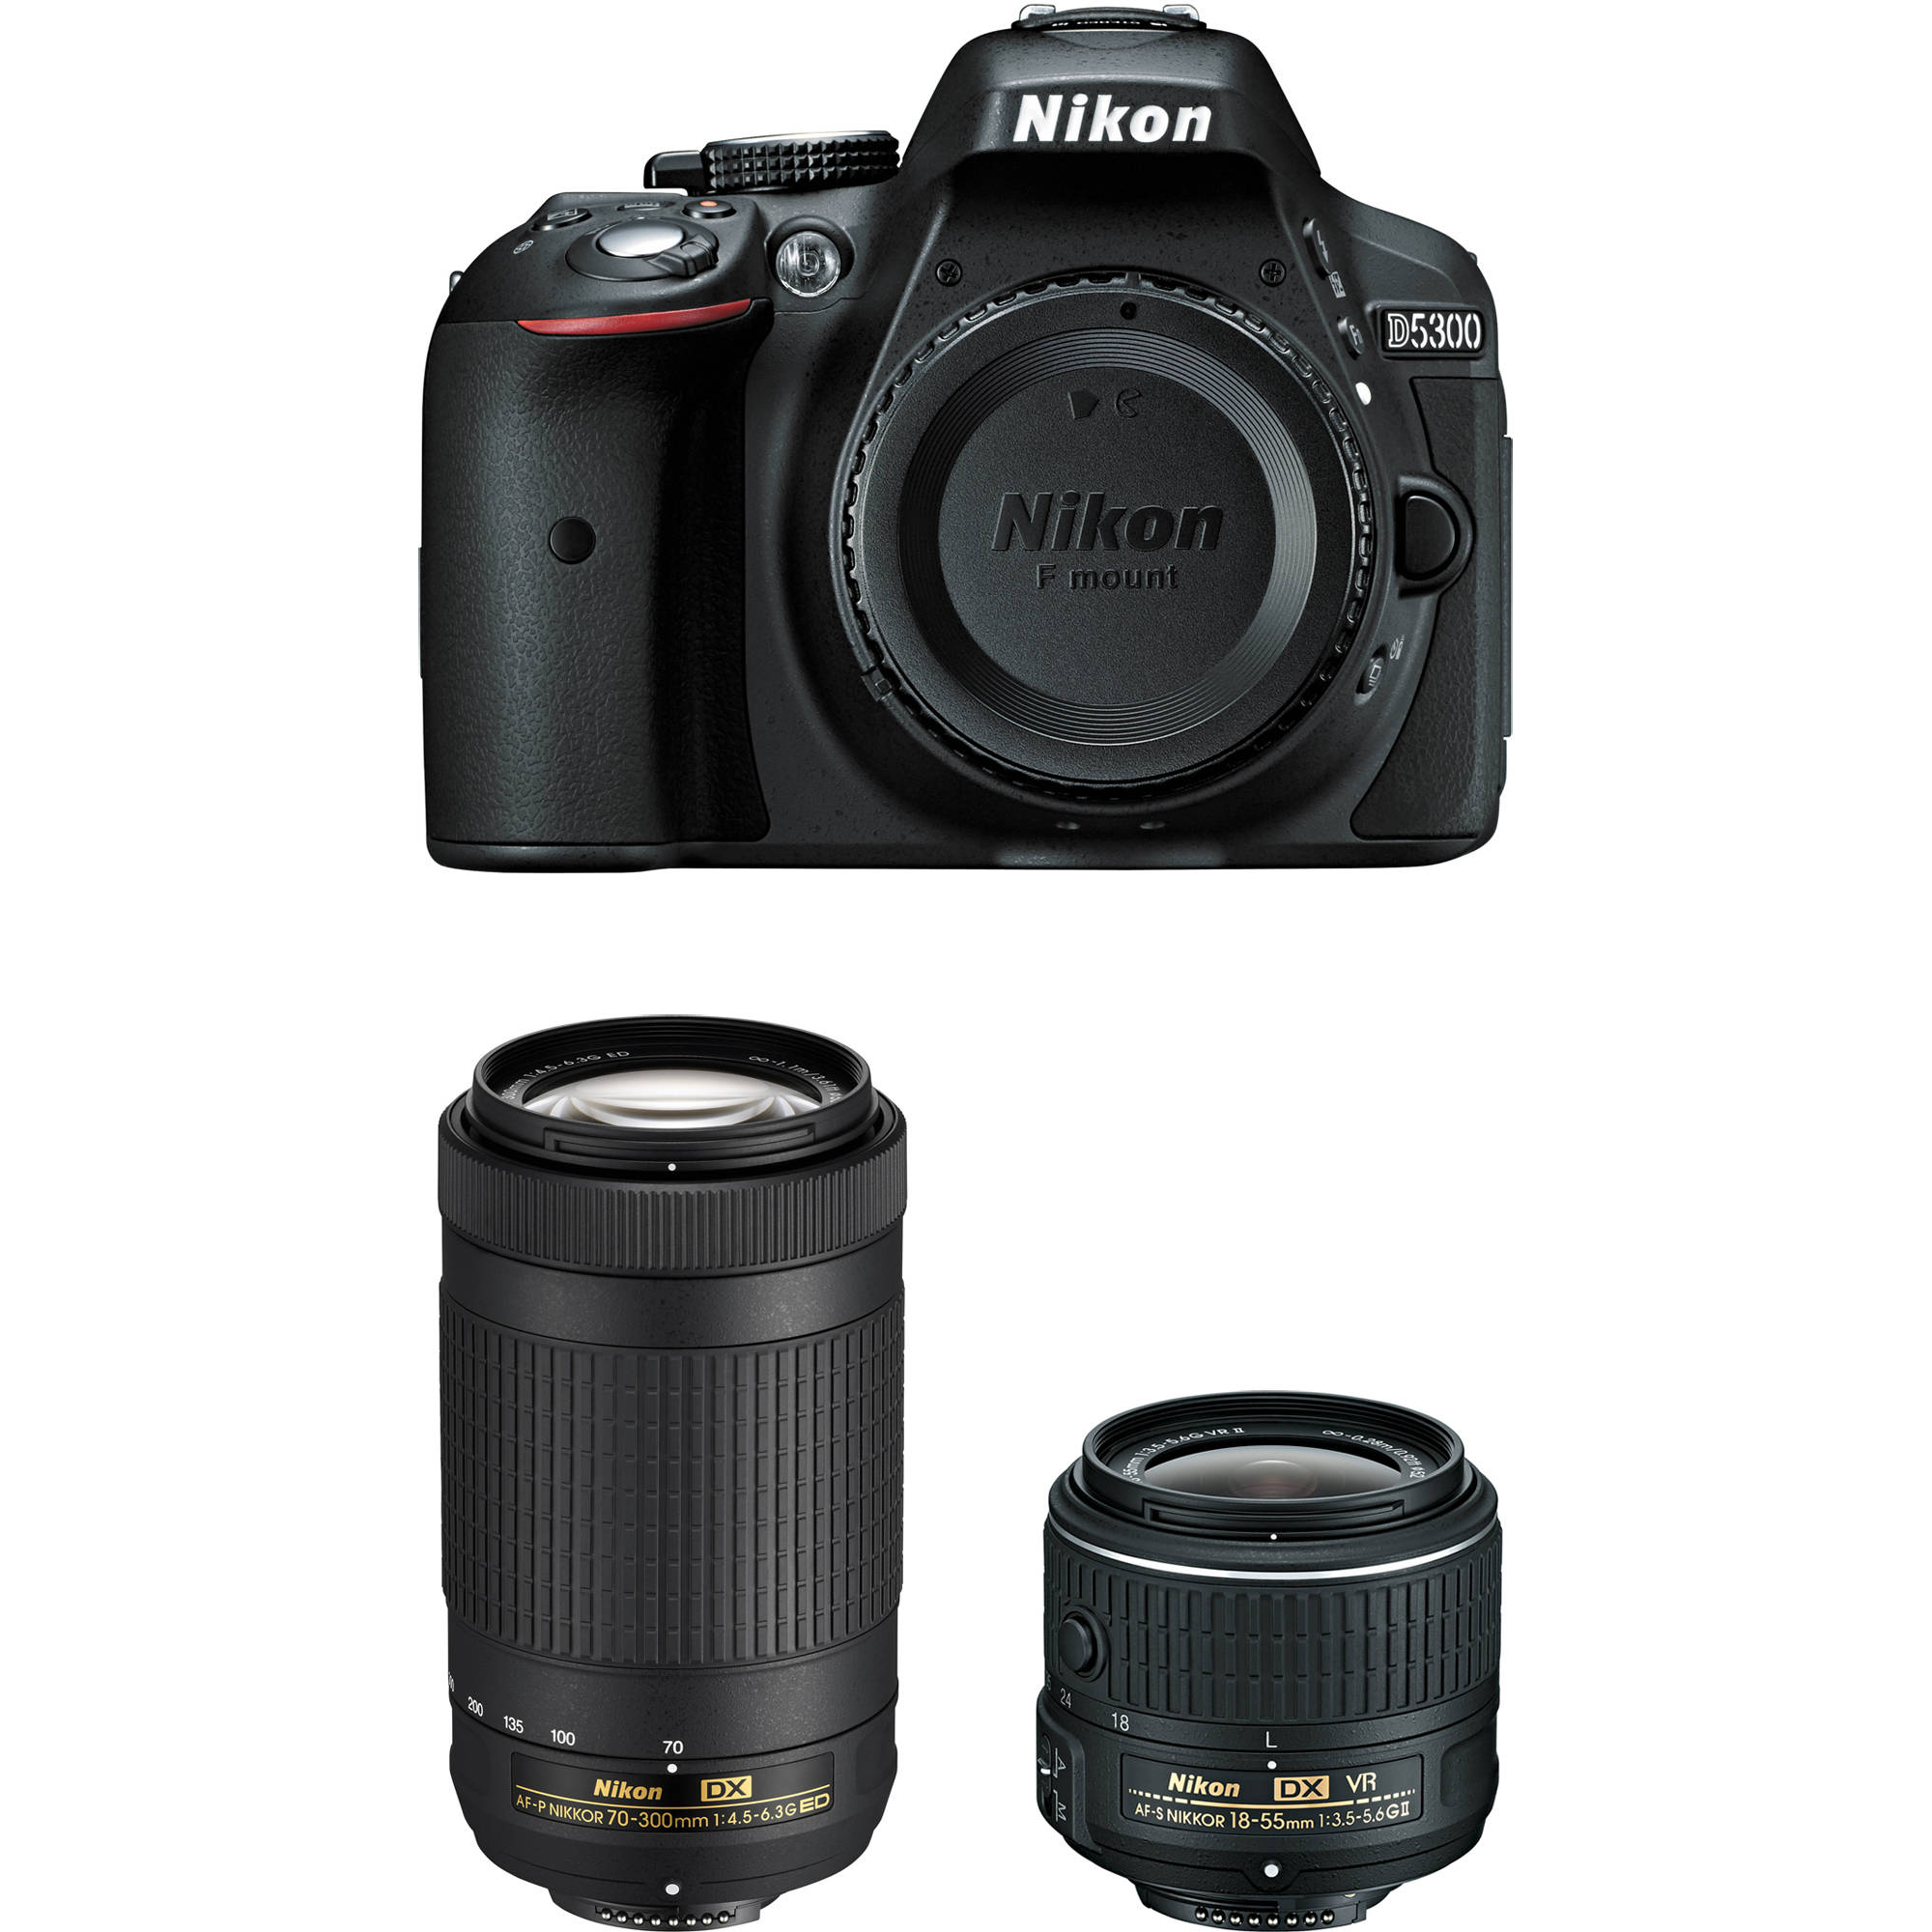 Nikon D5300 DSLR Camera with 18-55mm and 70-300mm Lenses